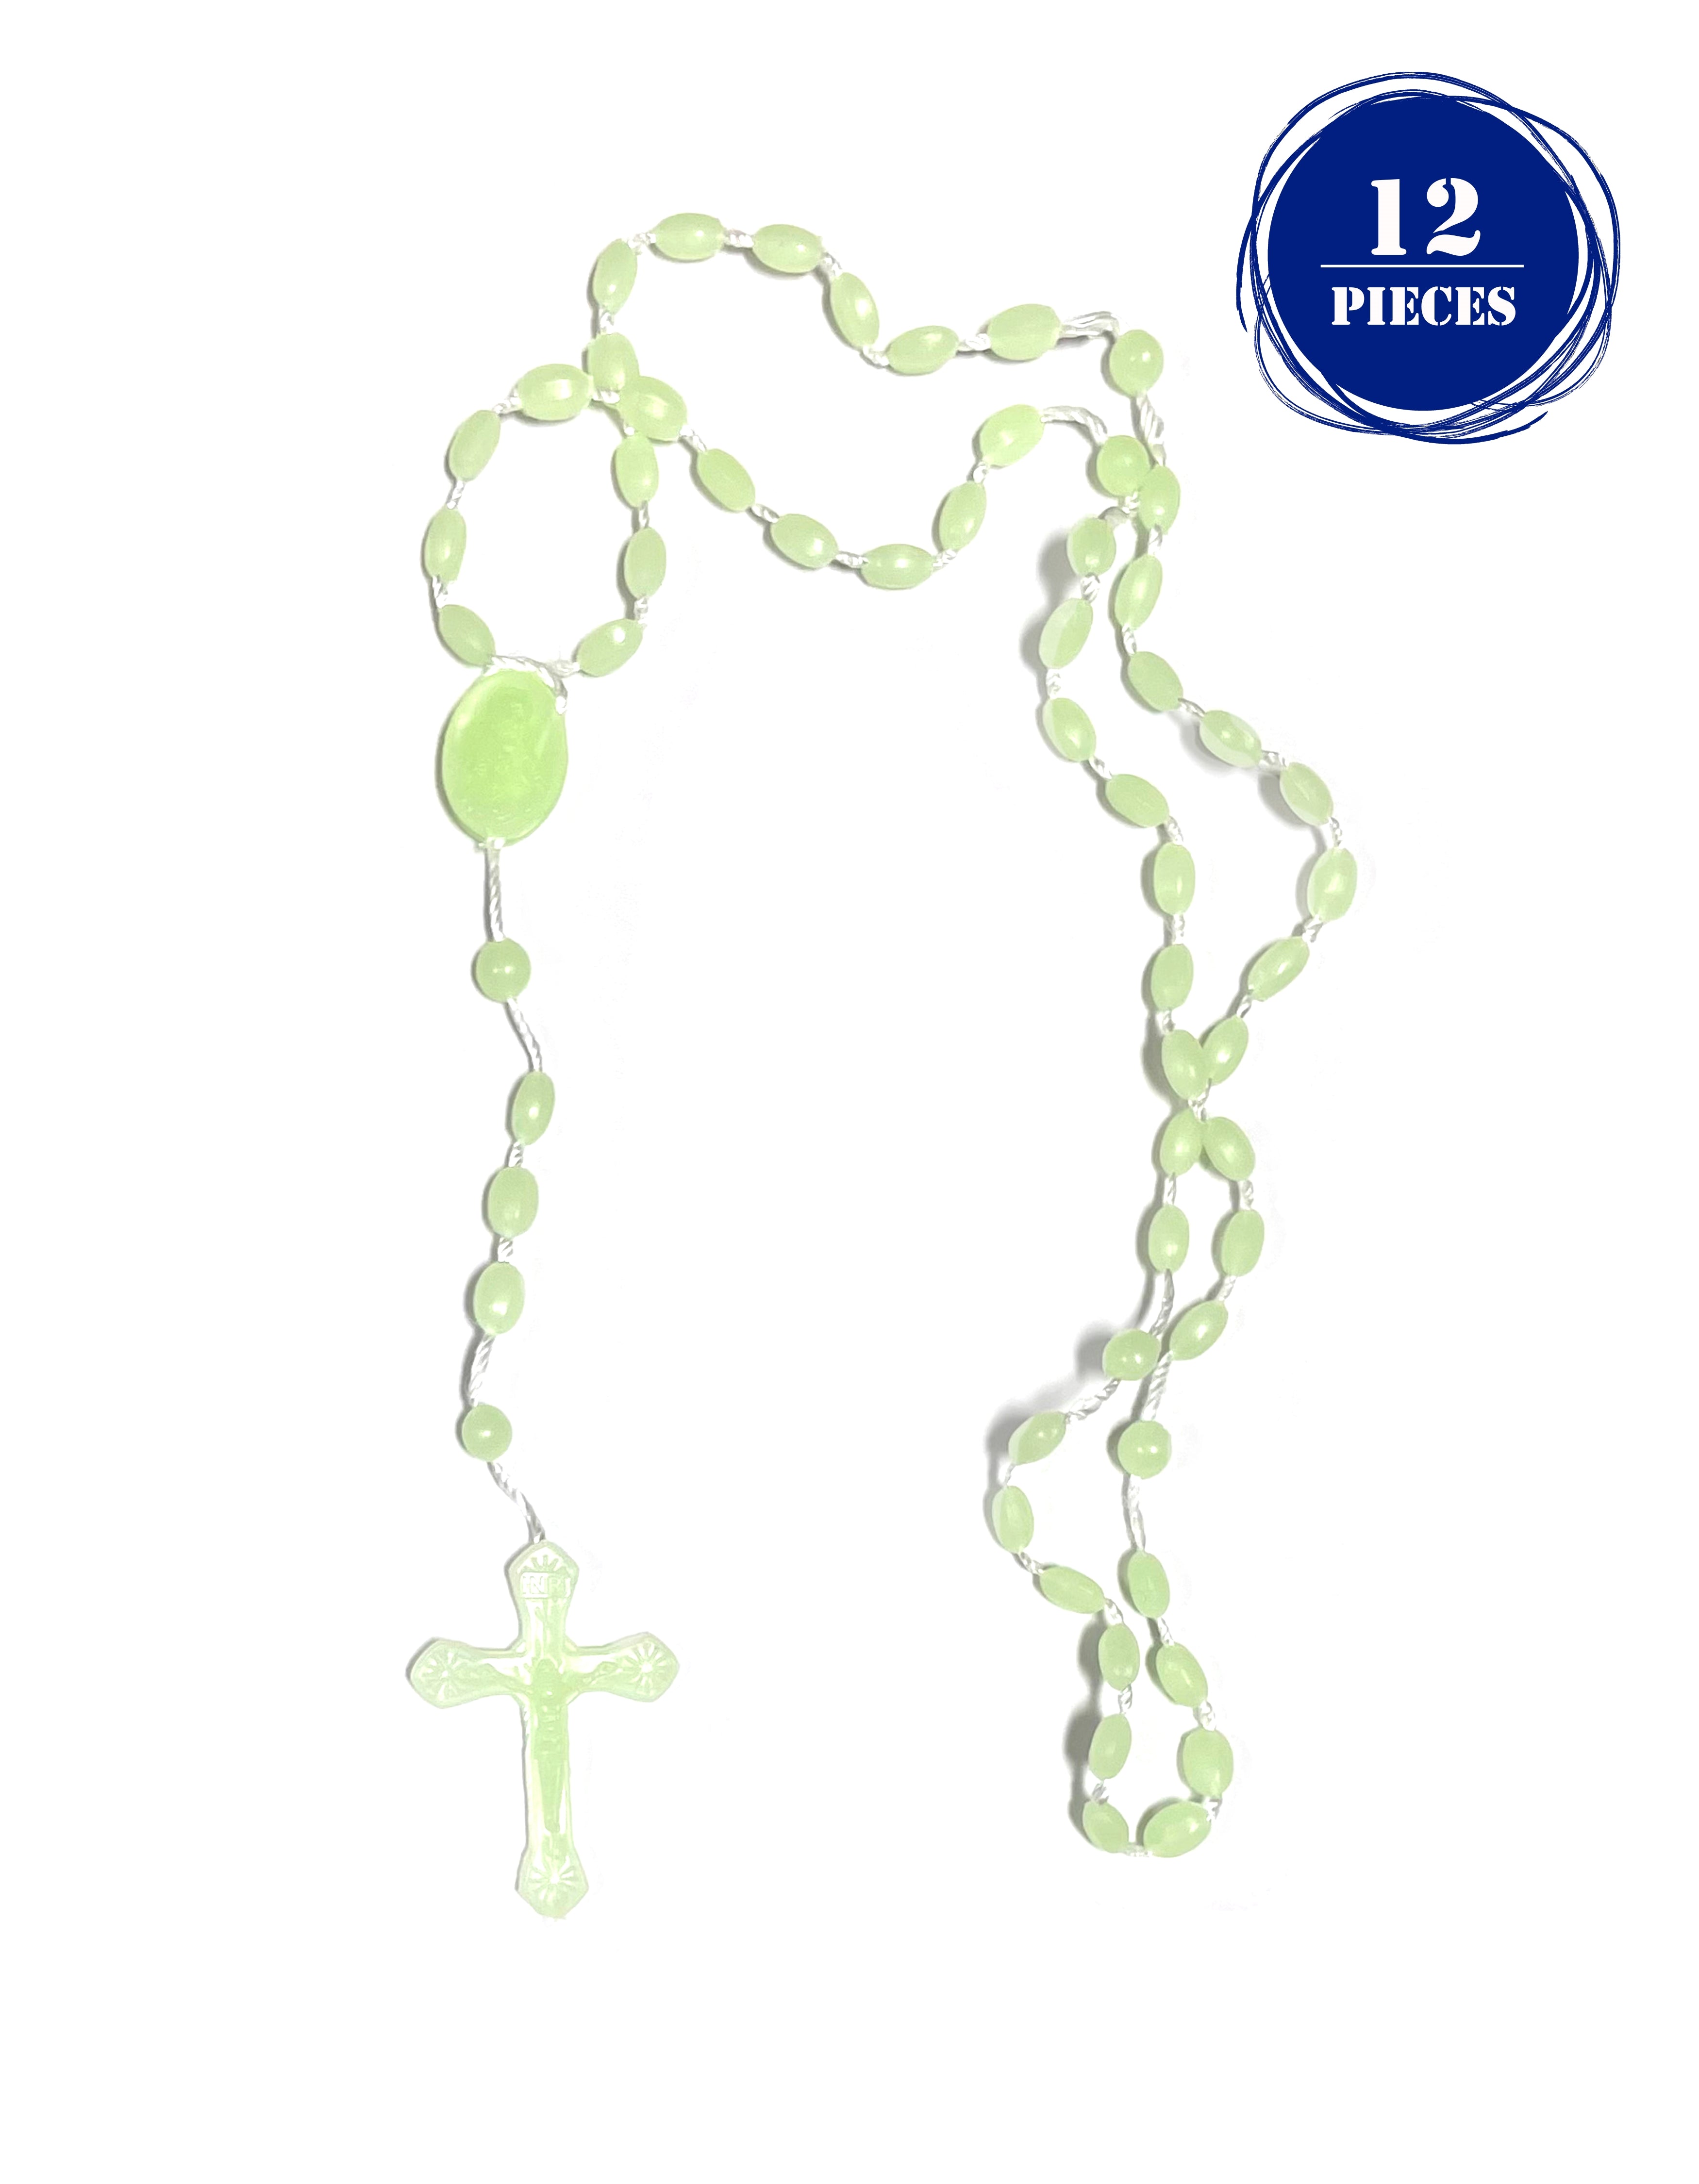 Plastic beads and cord rosary - 12 Pieces